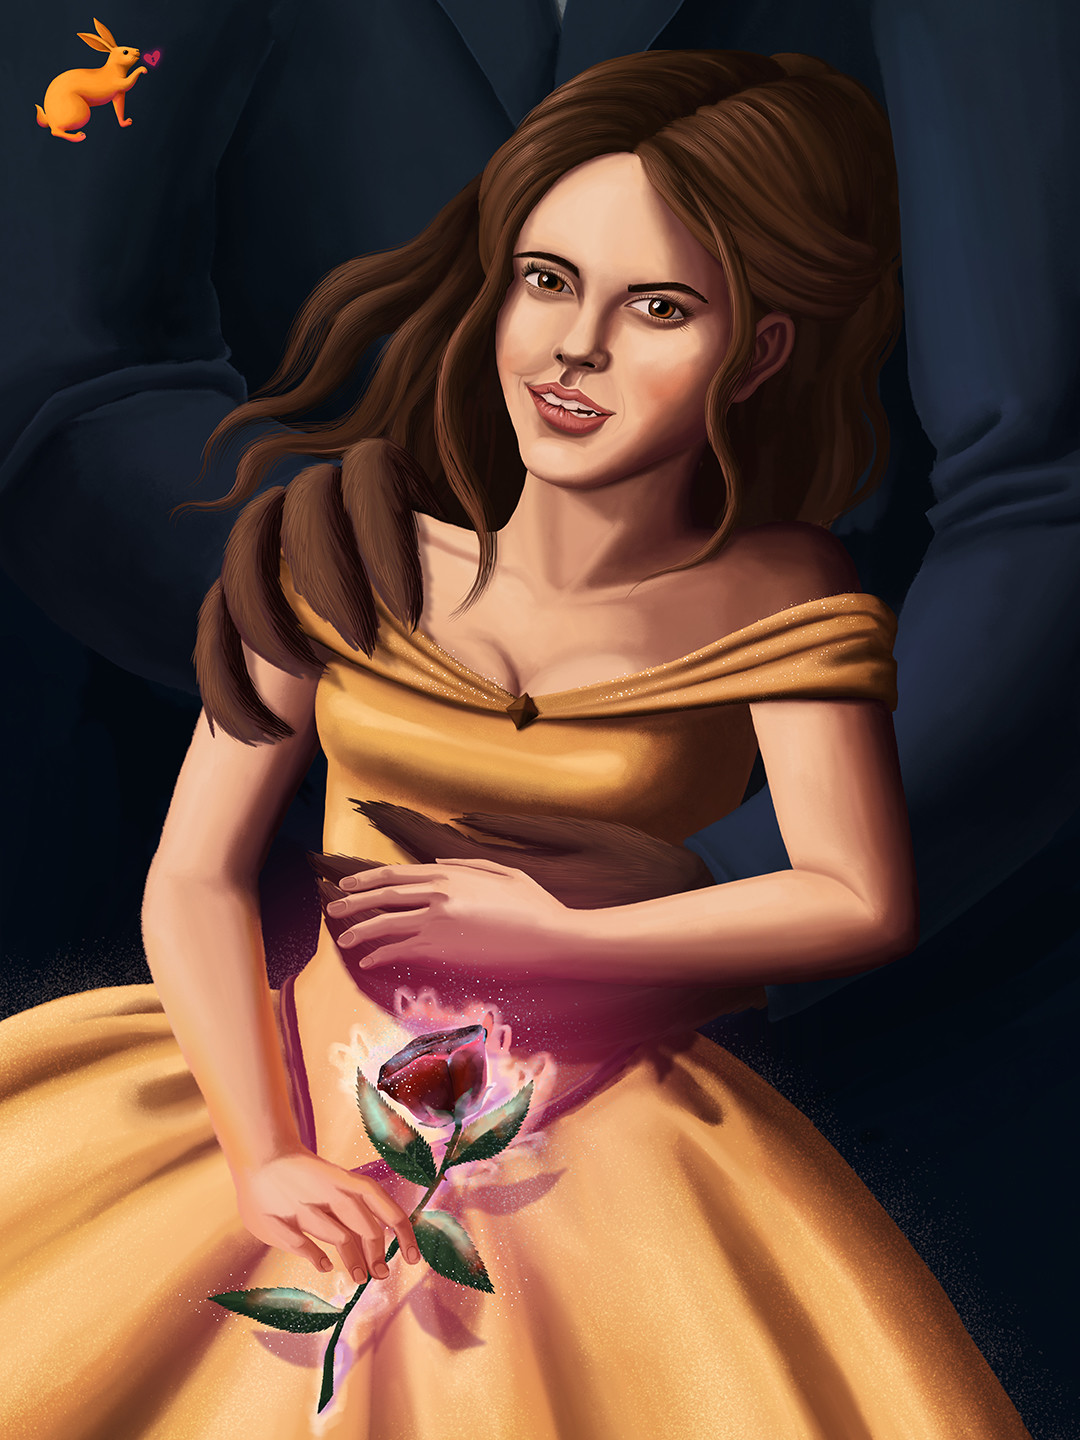 belle beauty and the beast tumblr